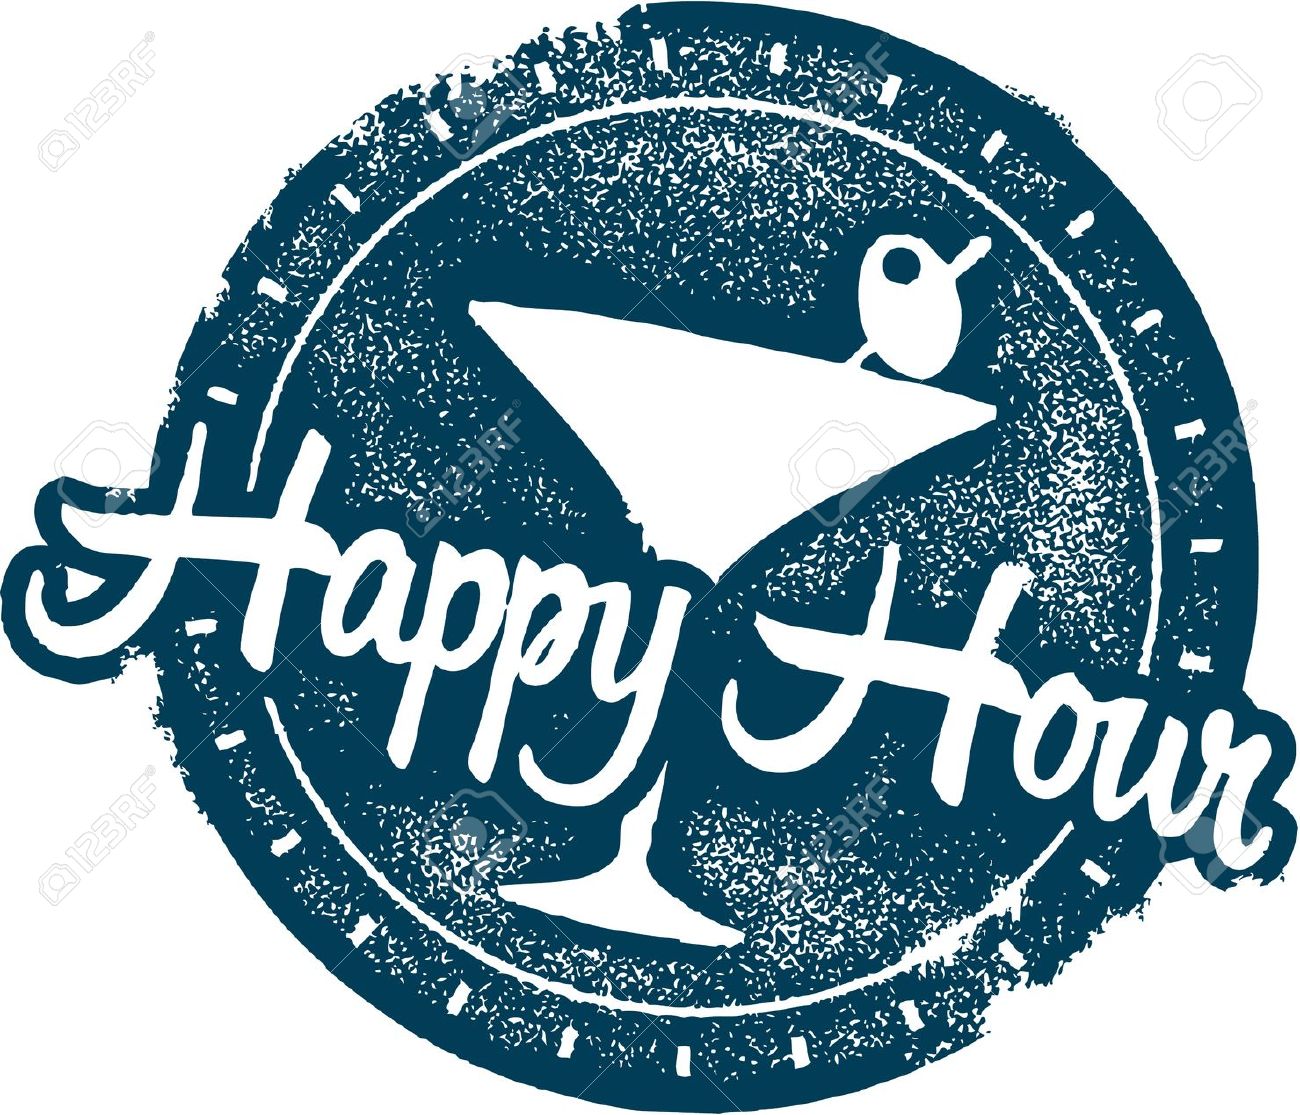 Free Cocktail Hour Cliparts, Download Free Clip Art, Free Clip Art.